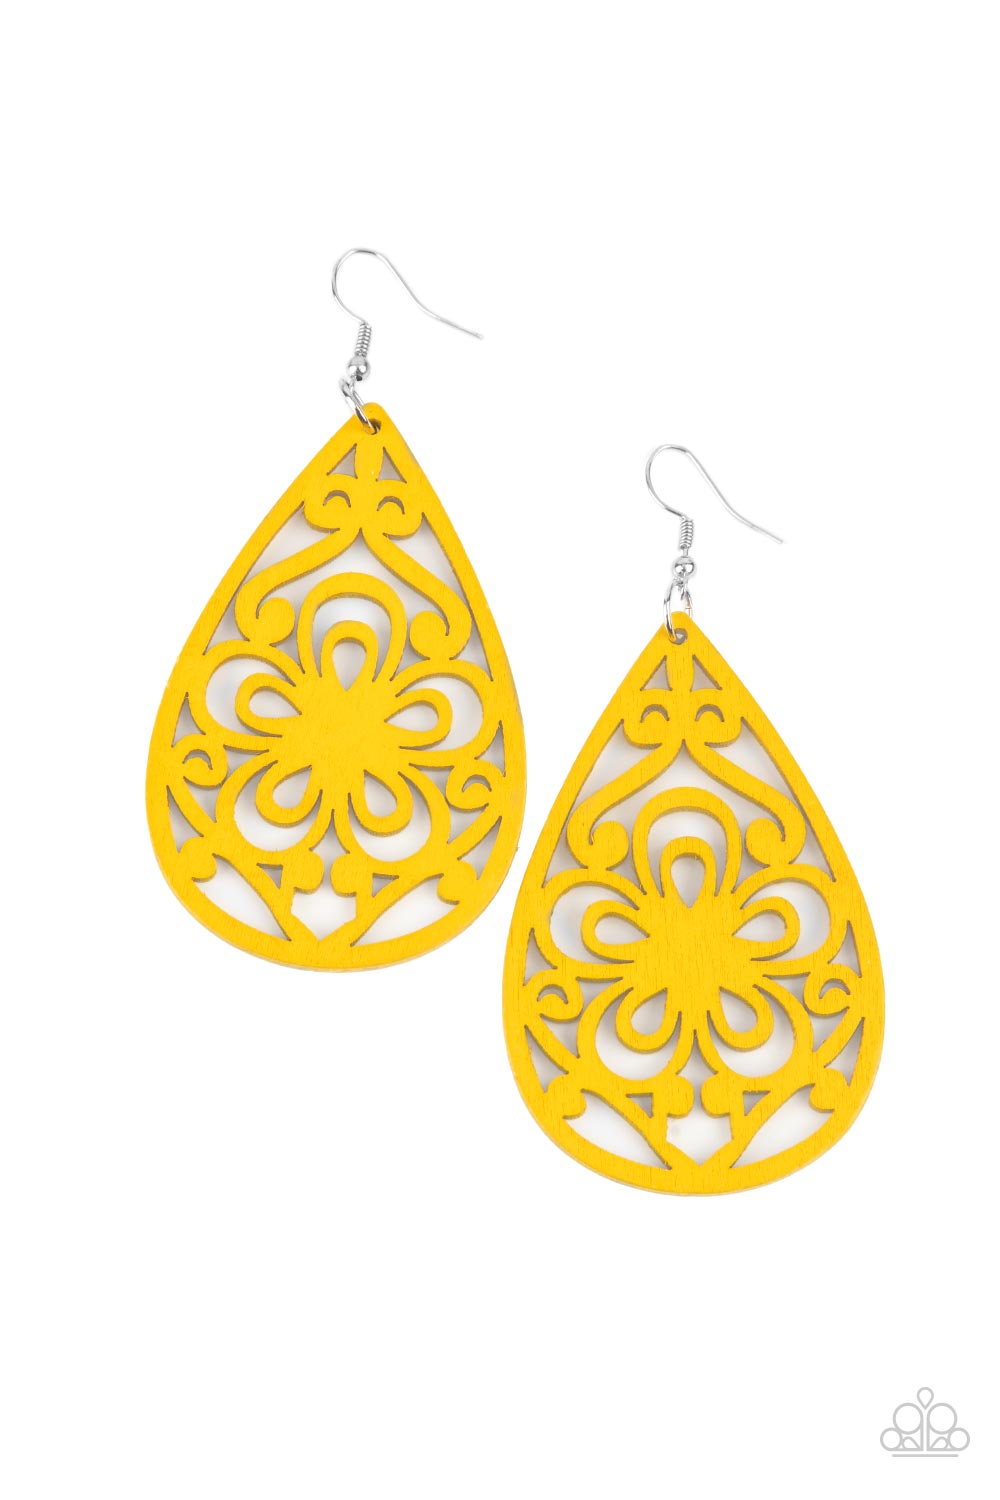 Marine Eden Yellow Wood Earrings - Paparazzi Accessories- lightbox - CarasShop.com - $5 Jewelry by Cara Jewels